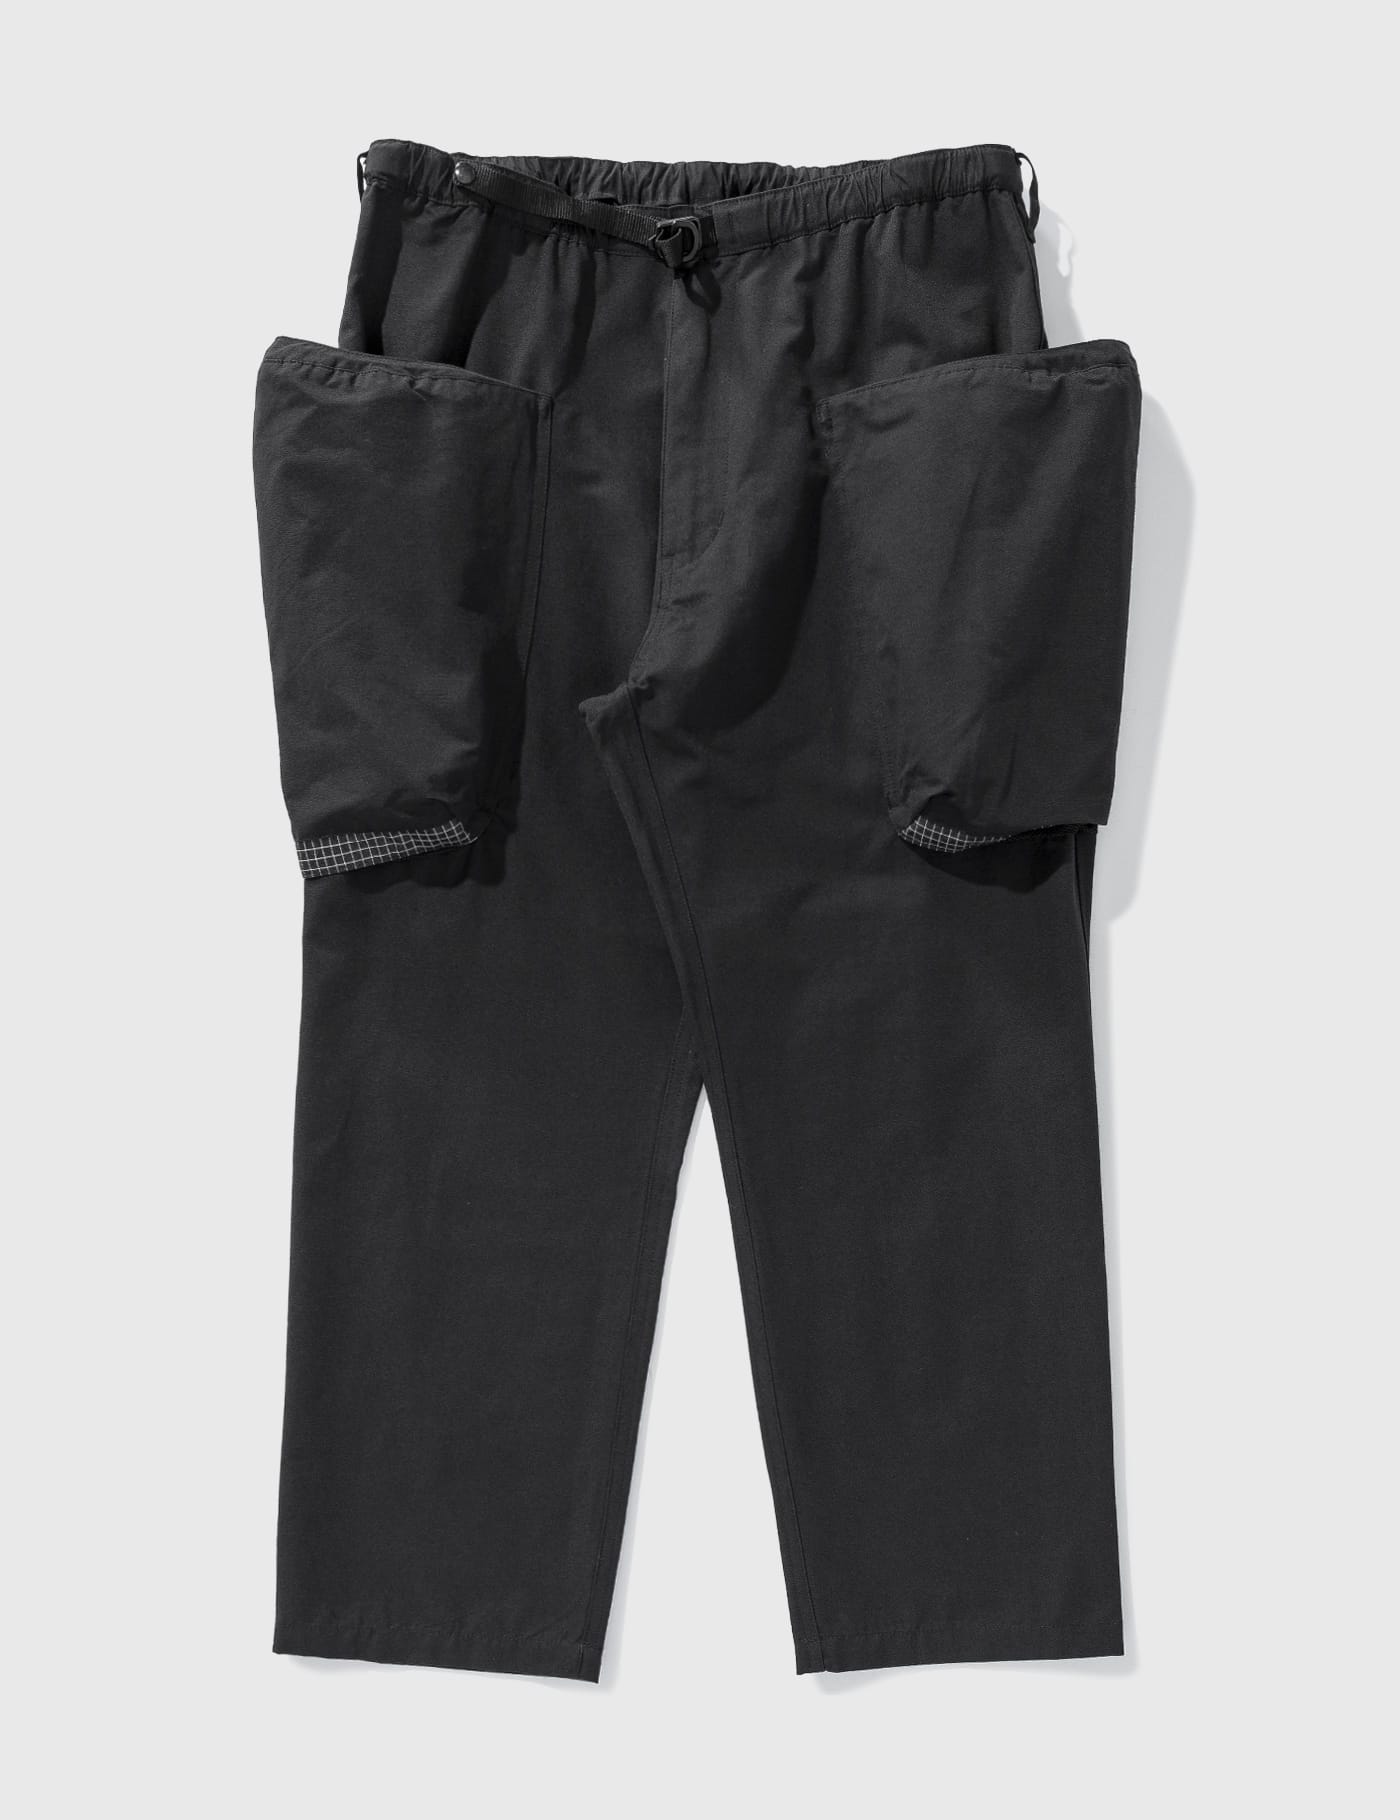 Comfy Outdoor Garment - Activity Pants | HBX - Globally Curated